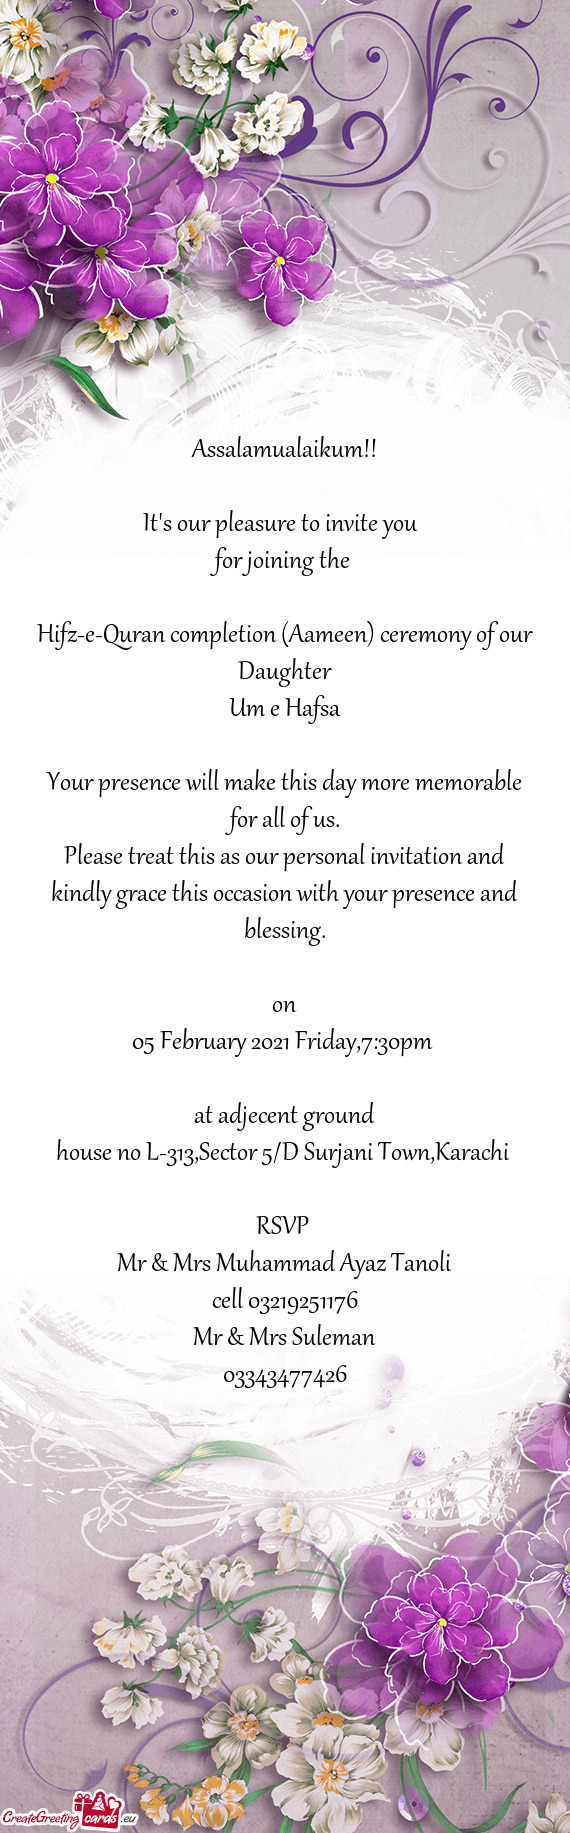 Hifz-e-Quran completion (Aameen) ceremony of our Daughter